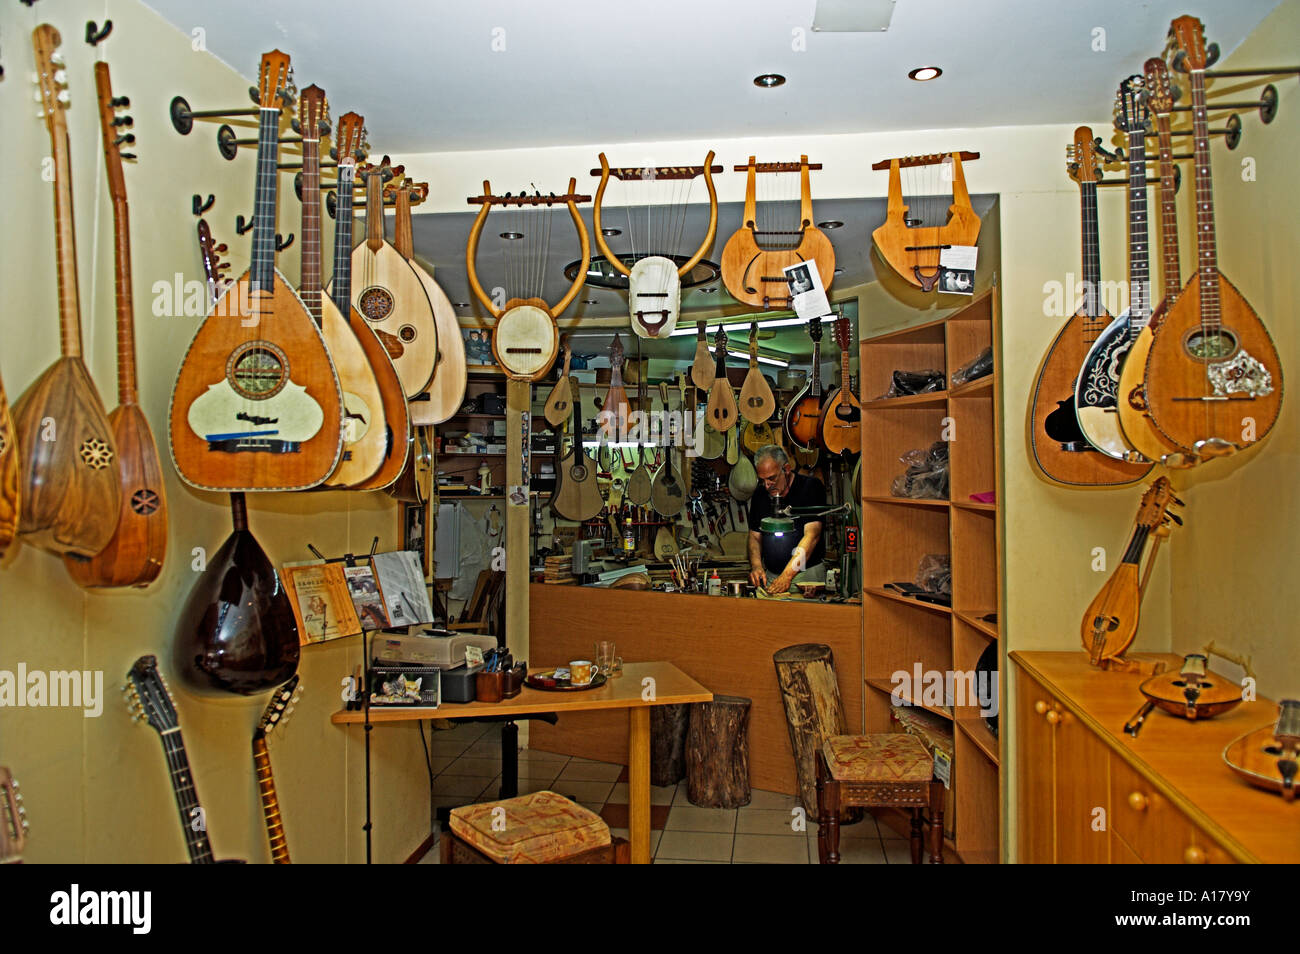 Stringed instruments displayed in shop and a craftsman instrument maker Stock Photo